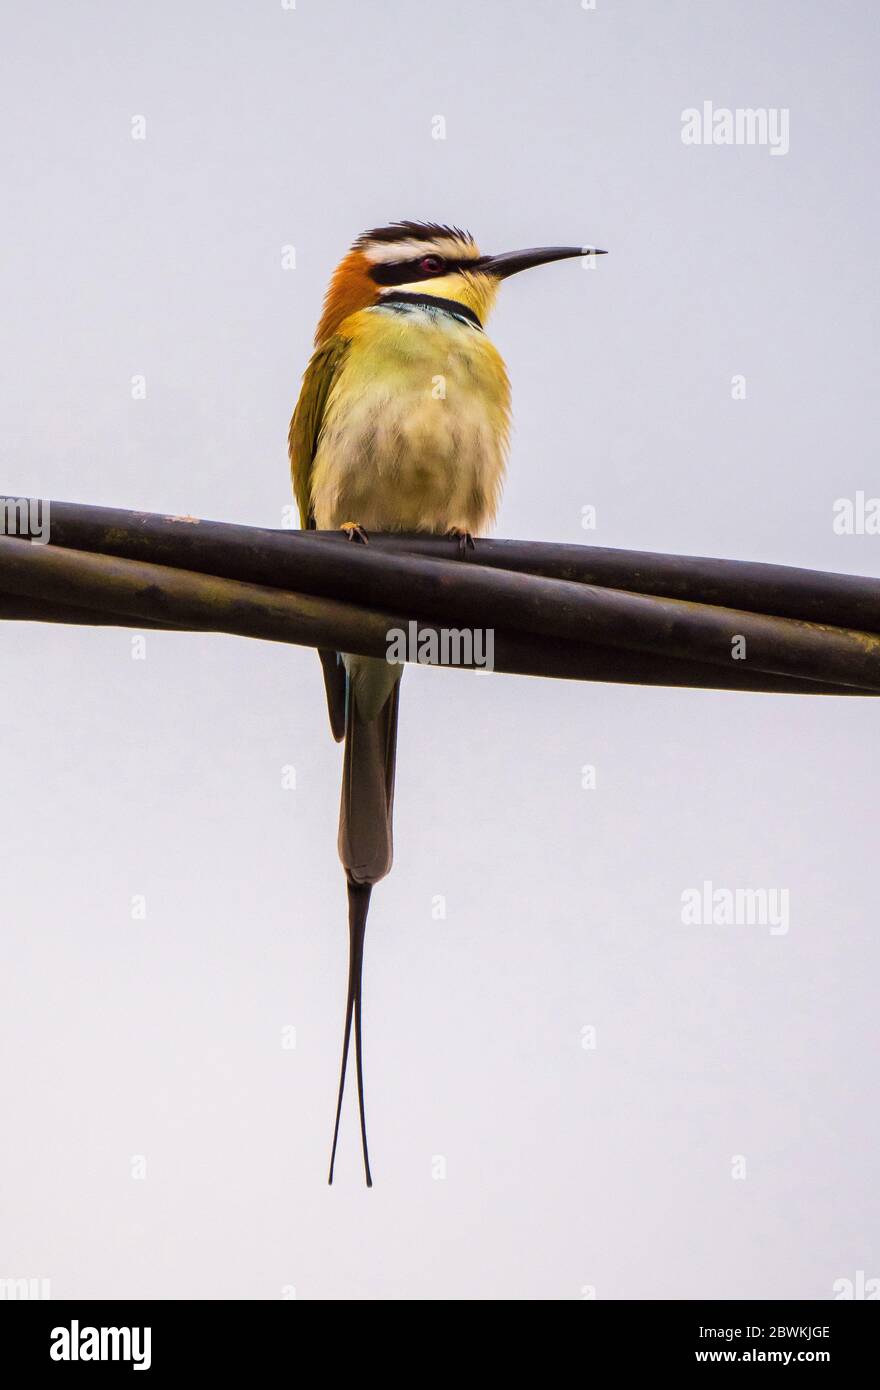 Abyssinian roller, Lilac-breasted roller (Coracias abyssinica, Coracias abyssinicus), perched on electricity wire, Gambia, Tendaba Stock Photo